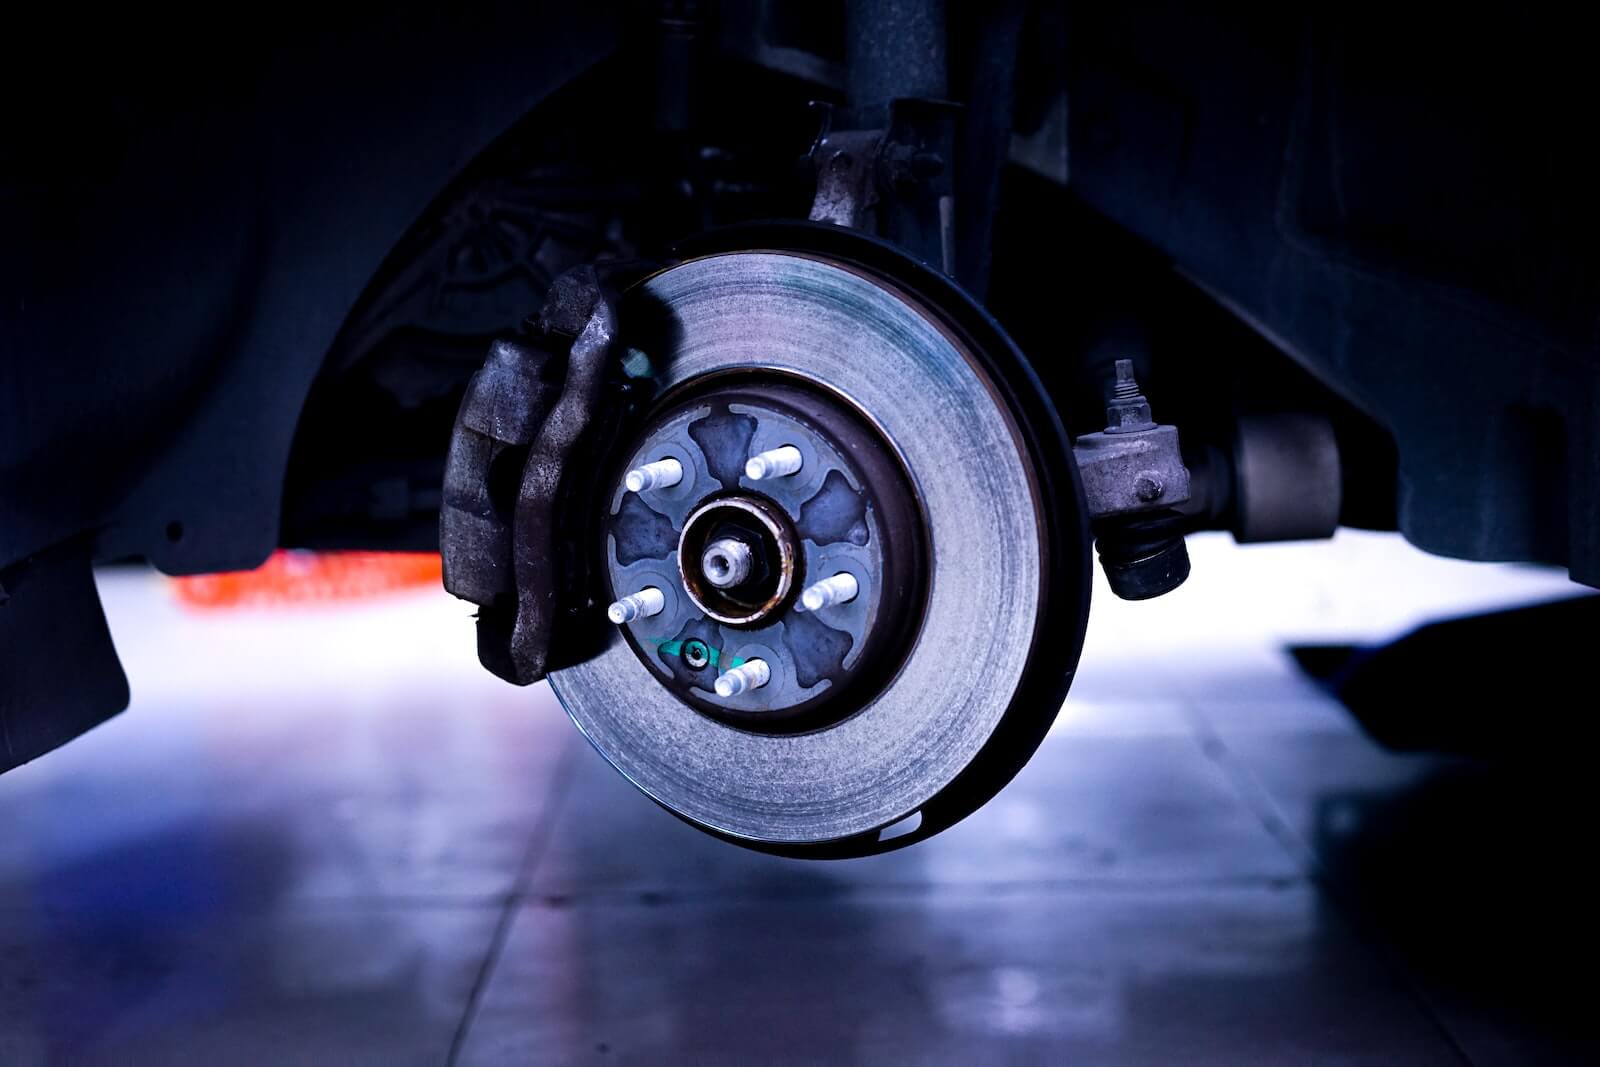 How to Know When to Change your Car Brakes – 5 Important Signs